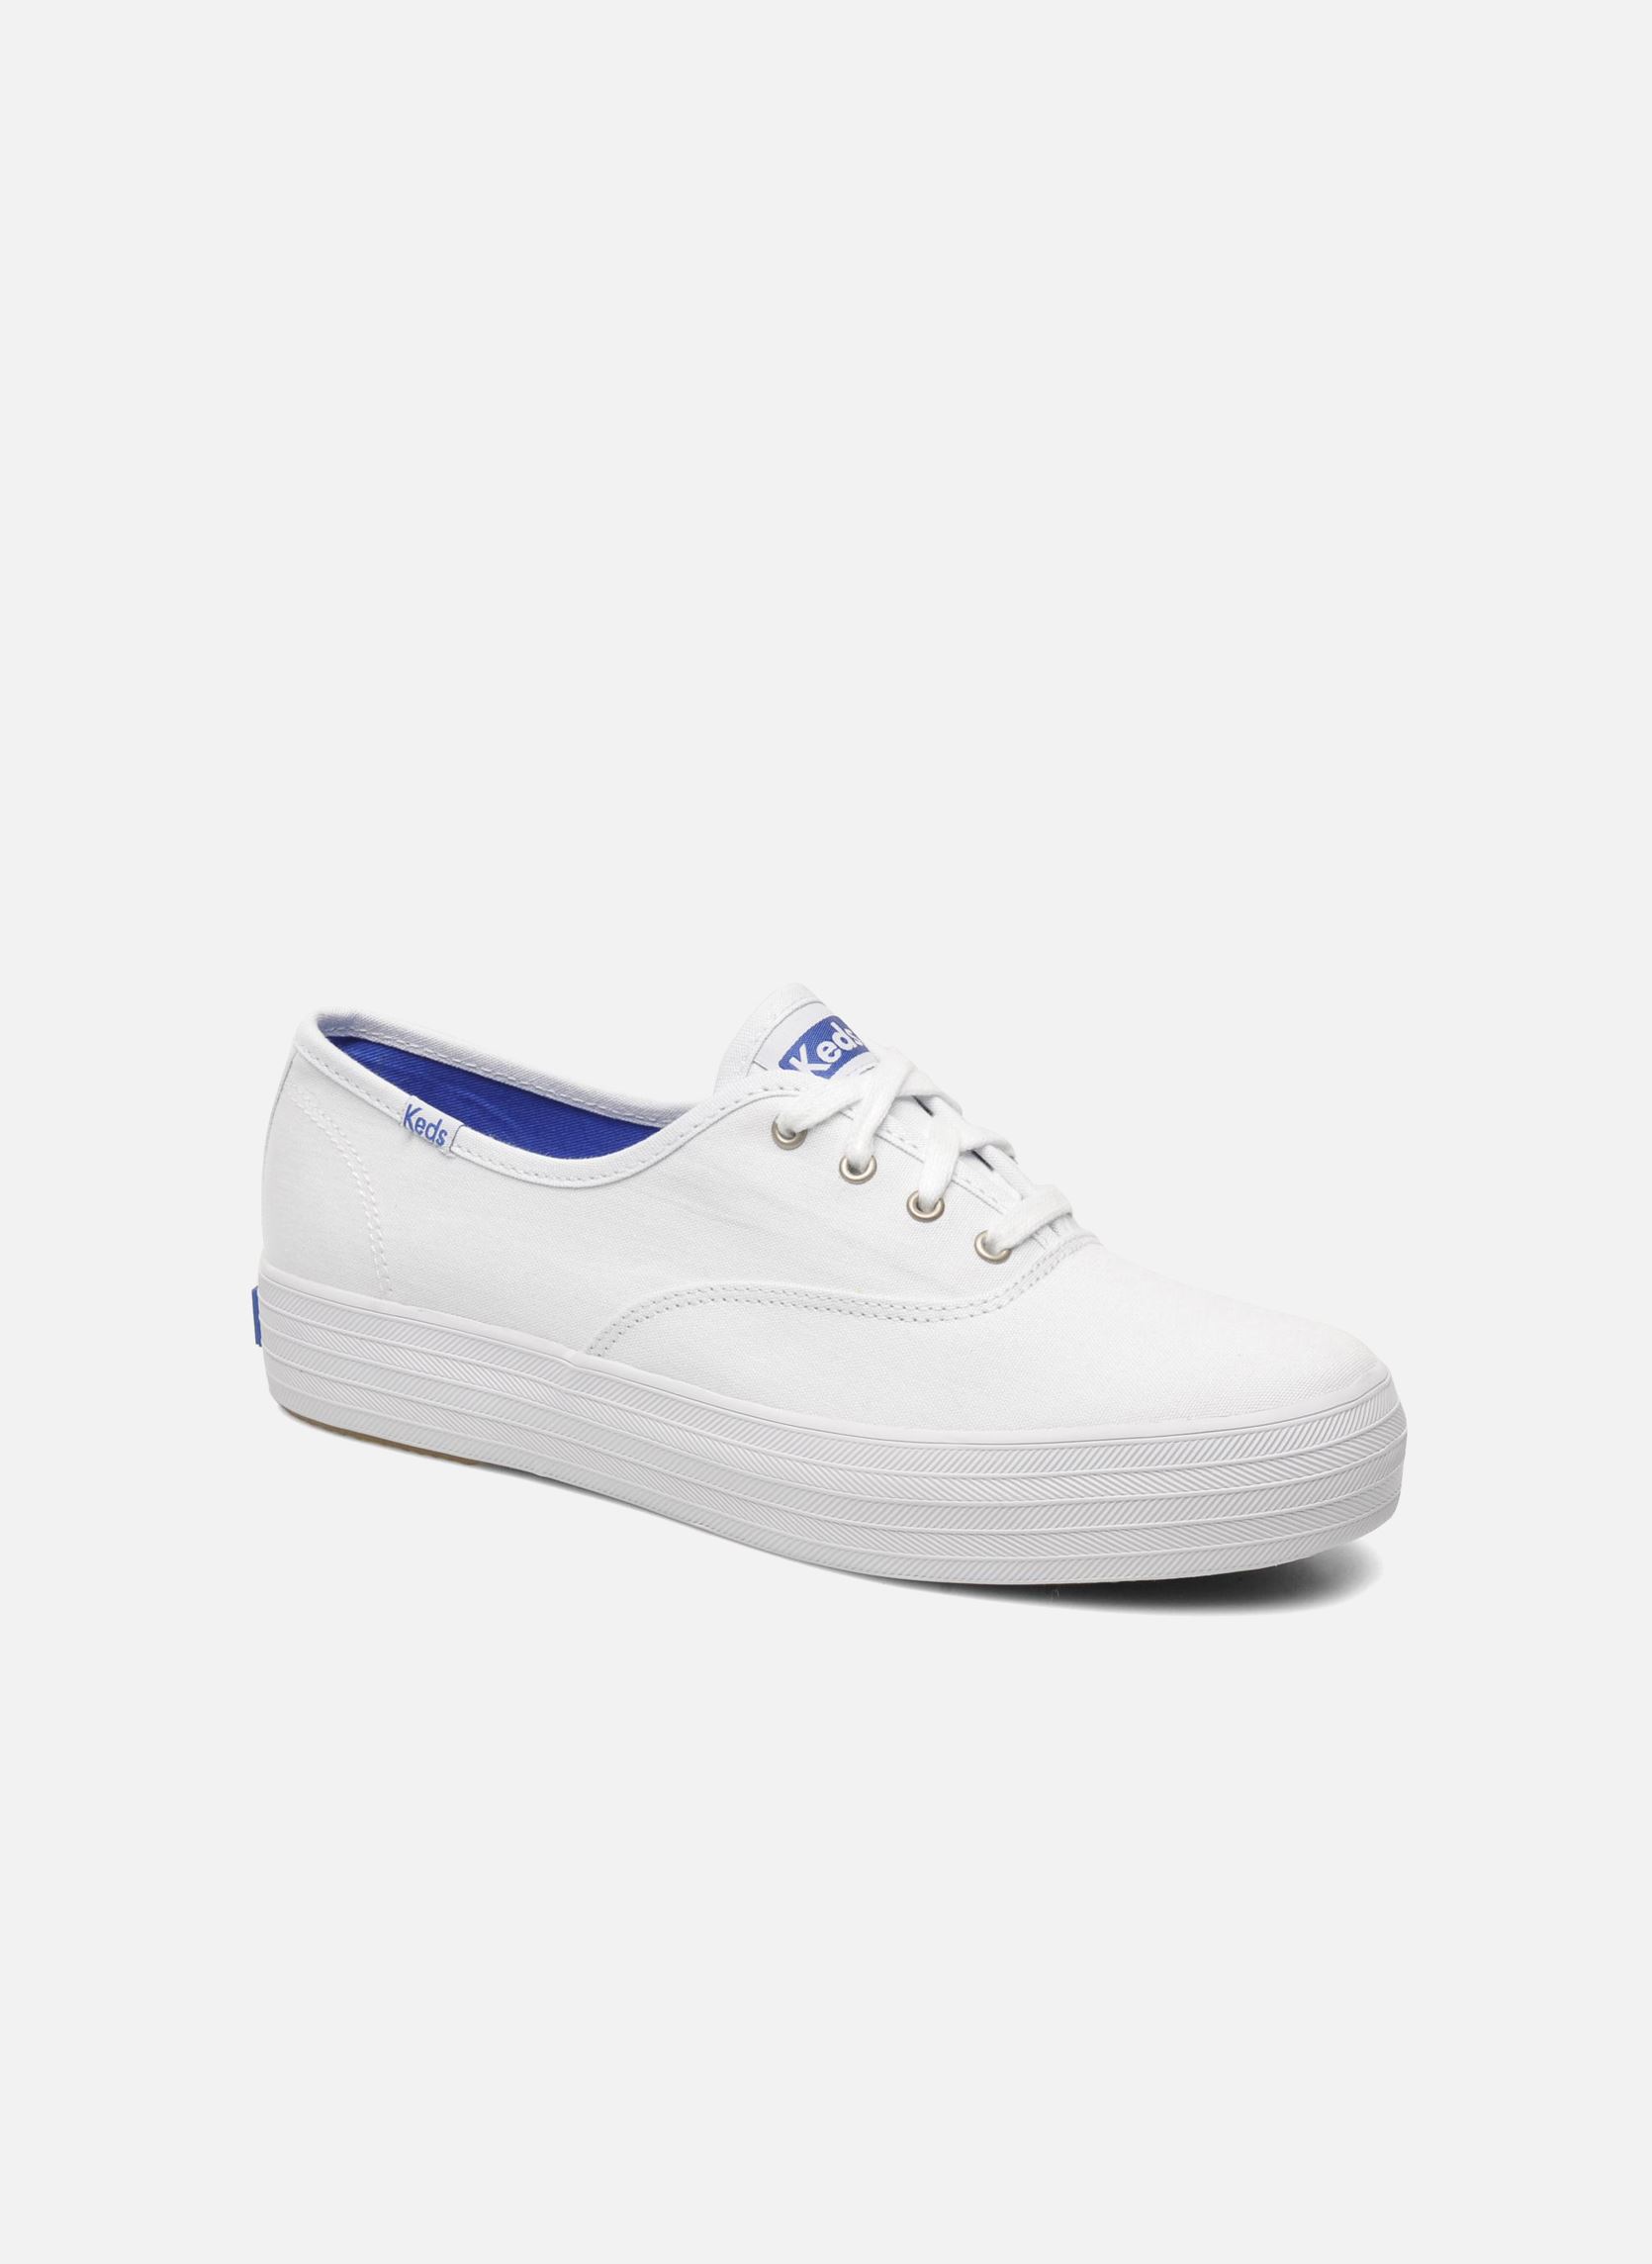 Keds Champion Triple Core Trainers in White at Sarenza.co.uk (185625)